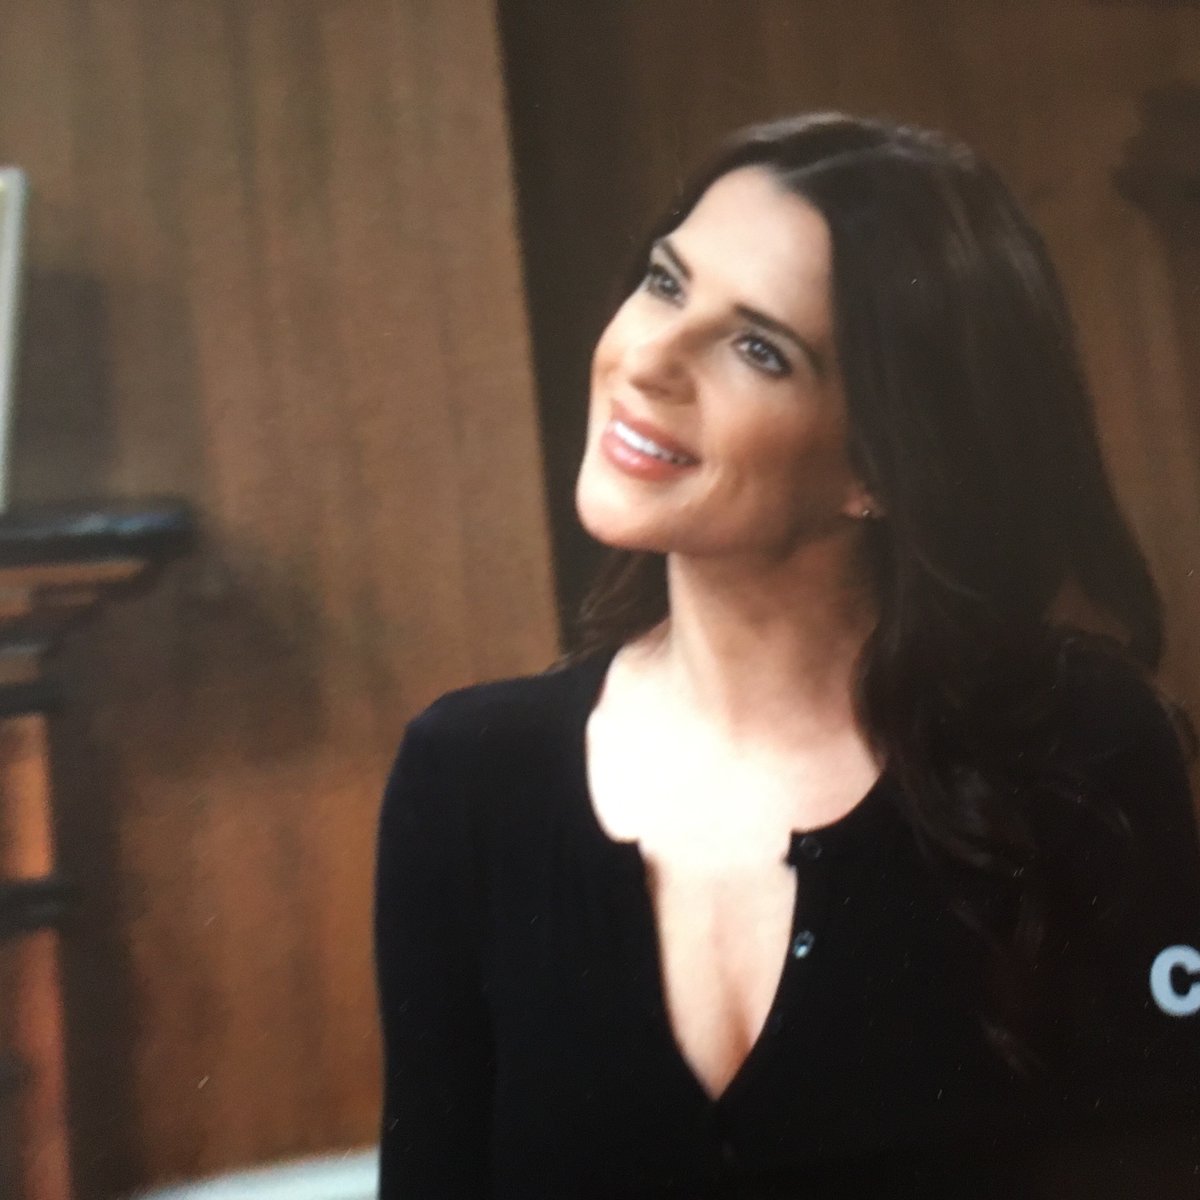 #WCW our beauty Miss @kellymonaco1 playing #SamMcCall #Kelly20 #WeLoveUKelly any and every day!